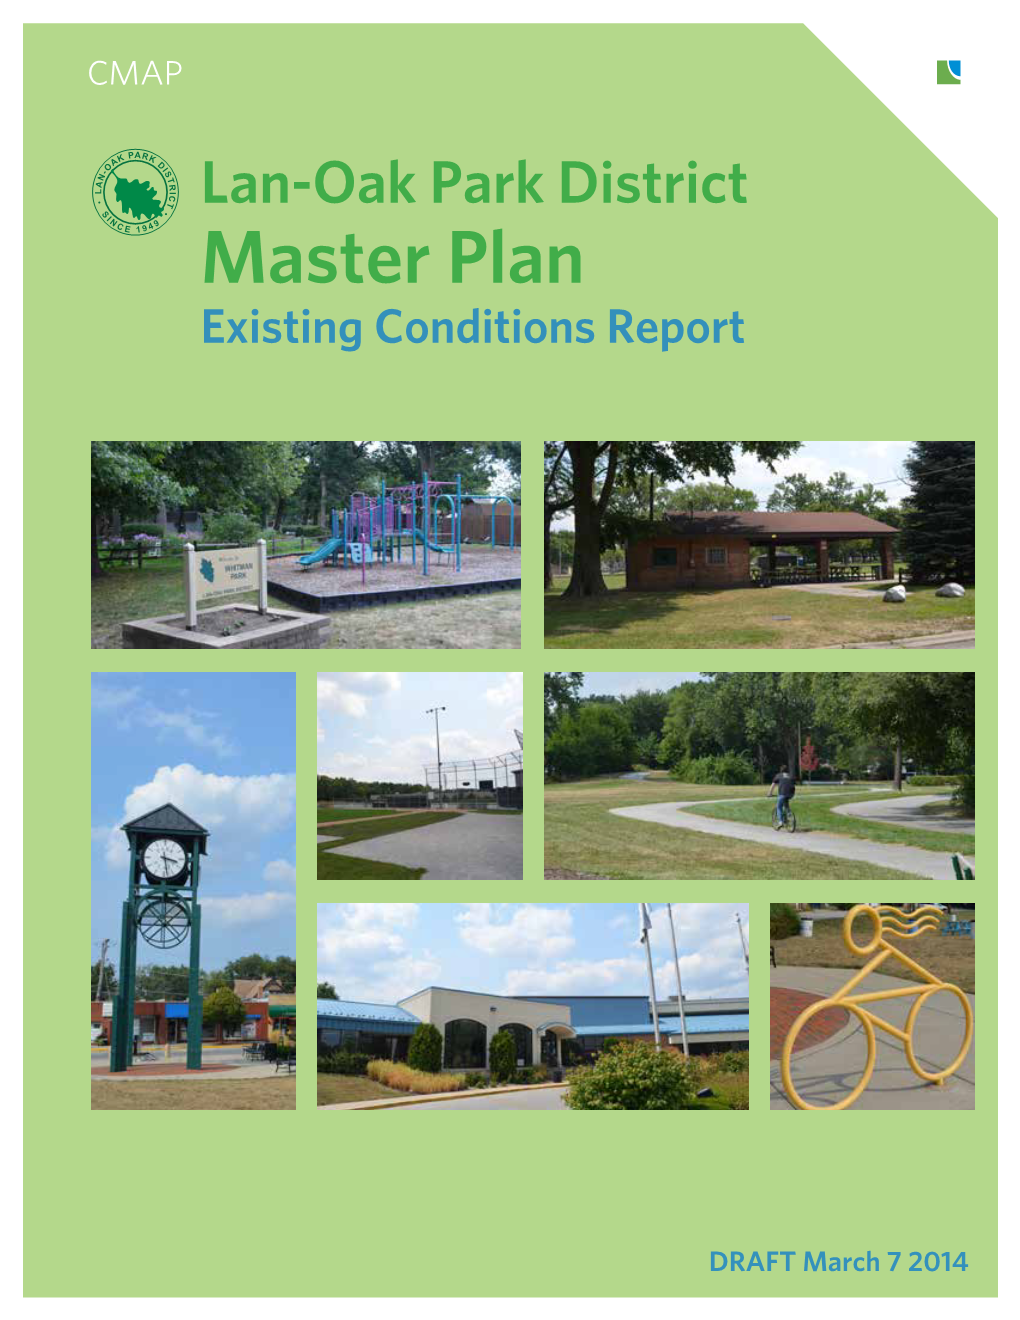 Lan-Oak Park District S I N C 9 E 1 9 4 Master Plan Existing Conditions Report